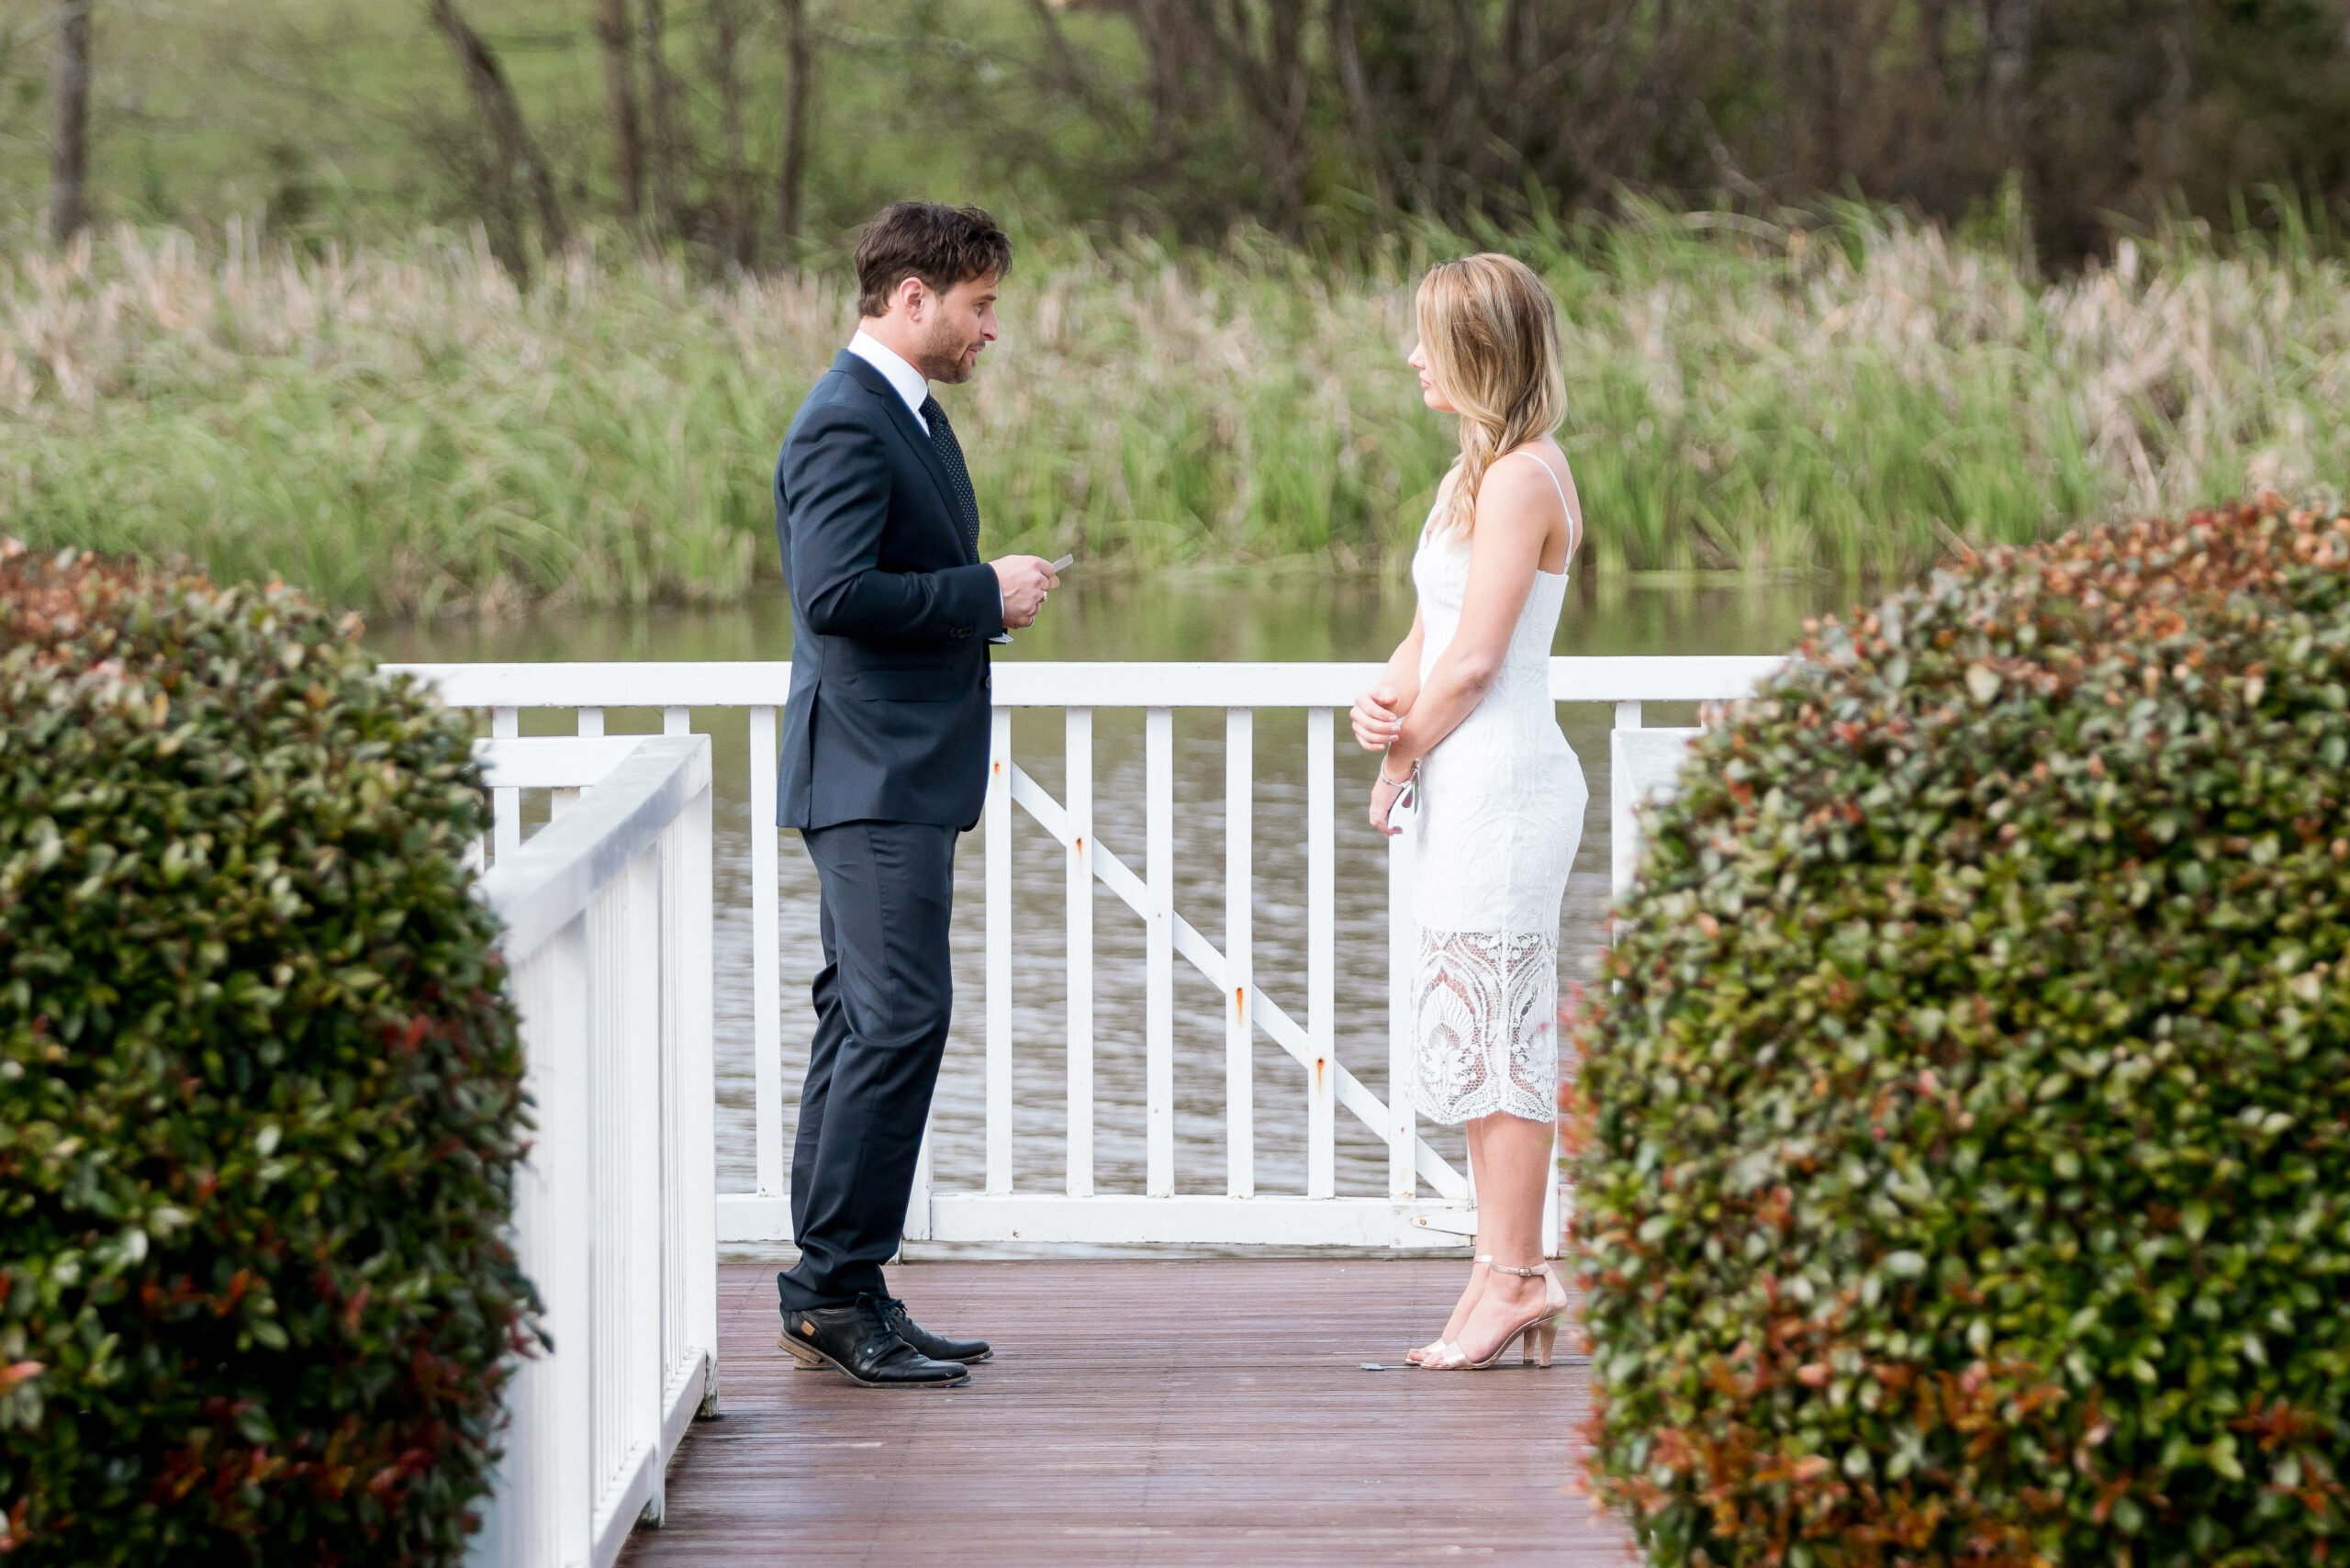 Married at First Sight NZ: Vicky leaves Andrew at final vows